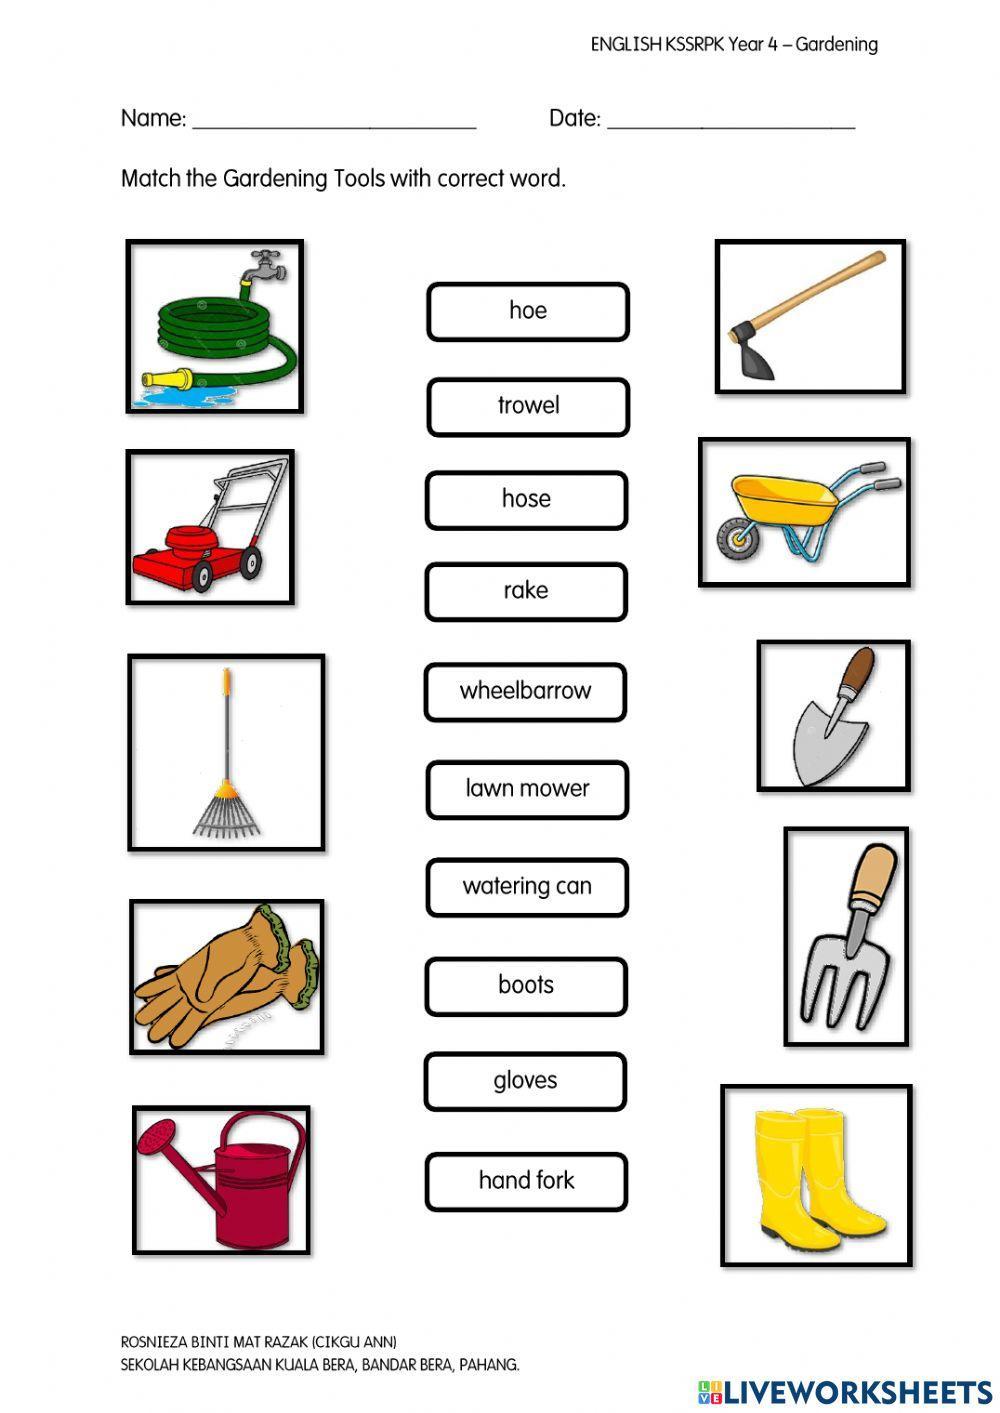 Gardening tools exercise | Live Worksheets